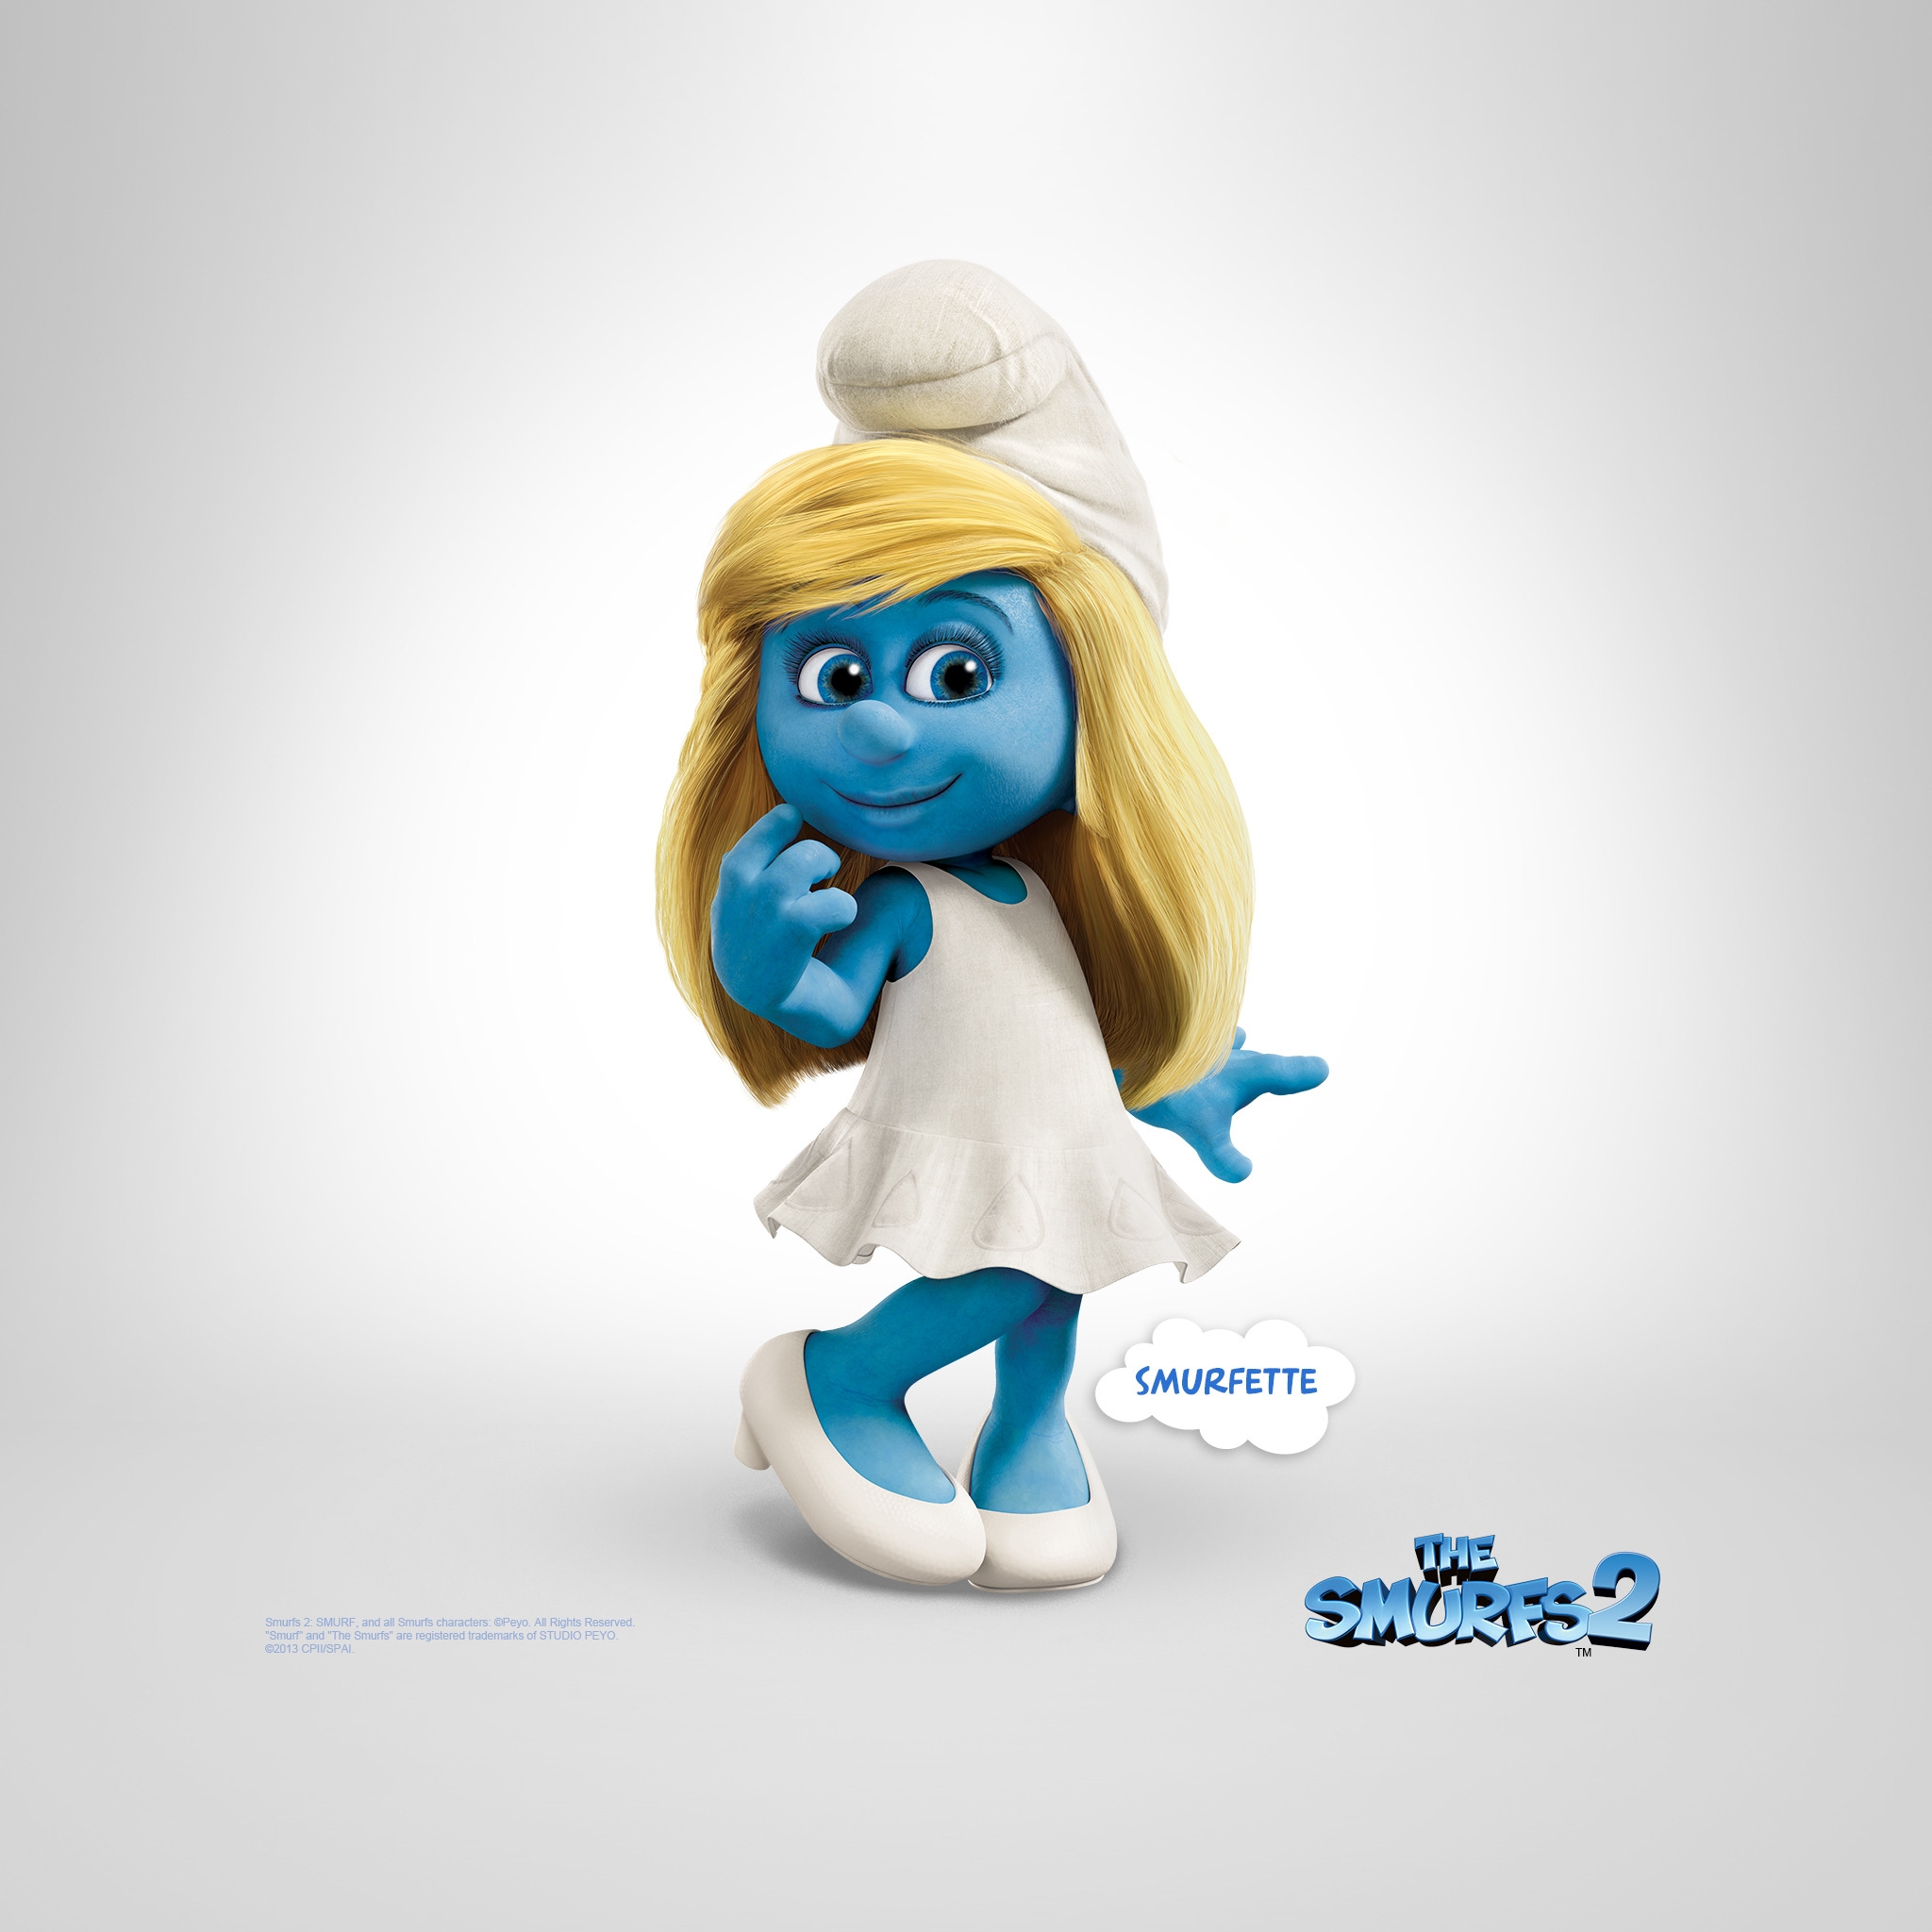 Smurfette The Smurfs 2 for 2048 x 2048 New iPad resolution